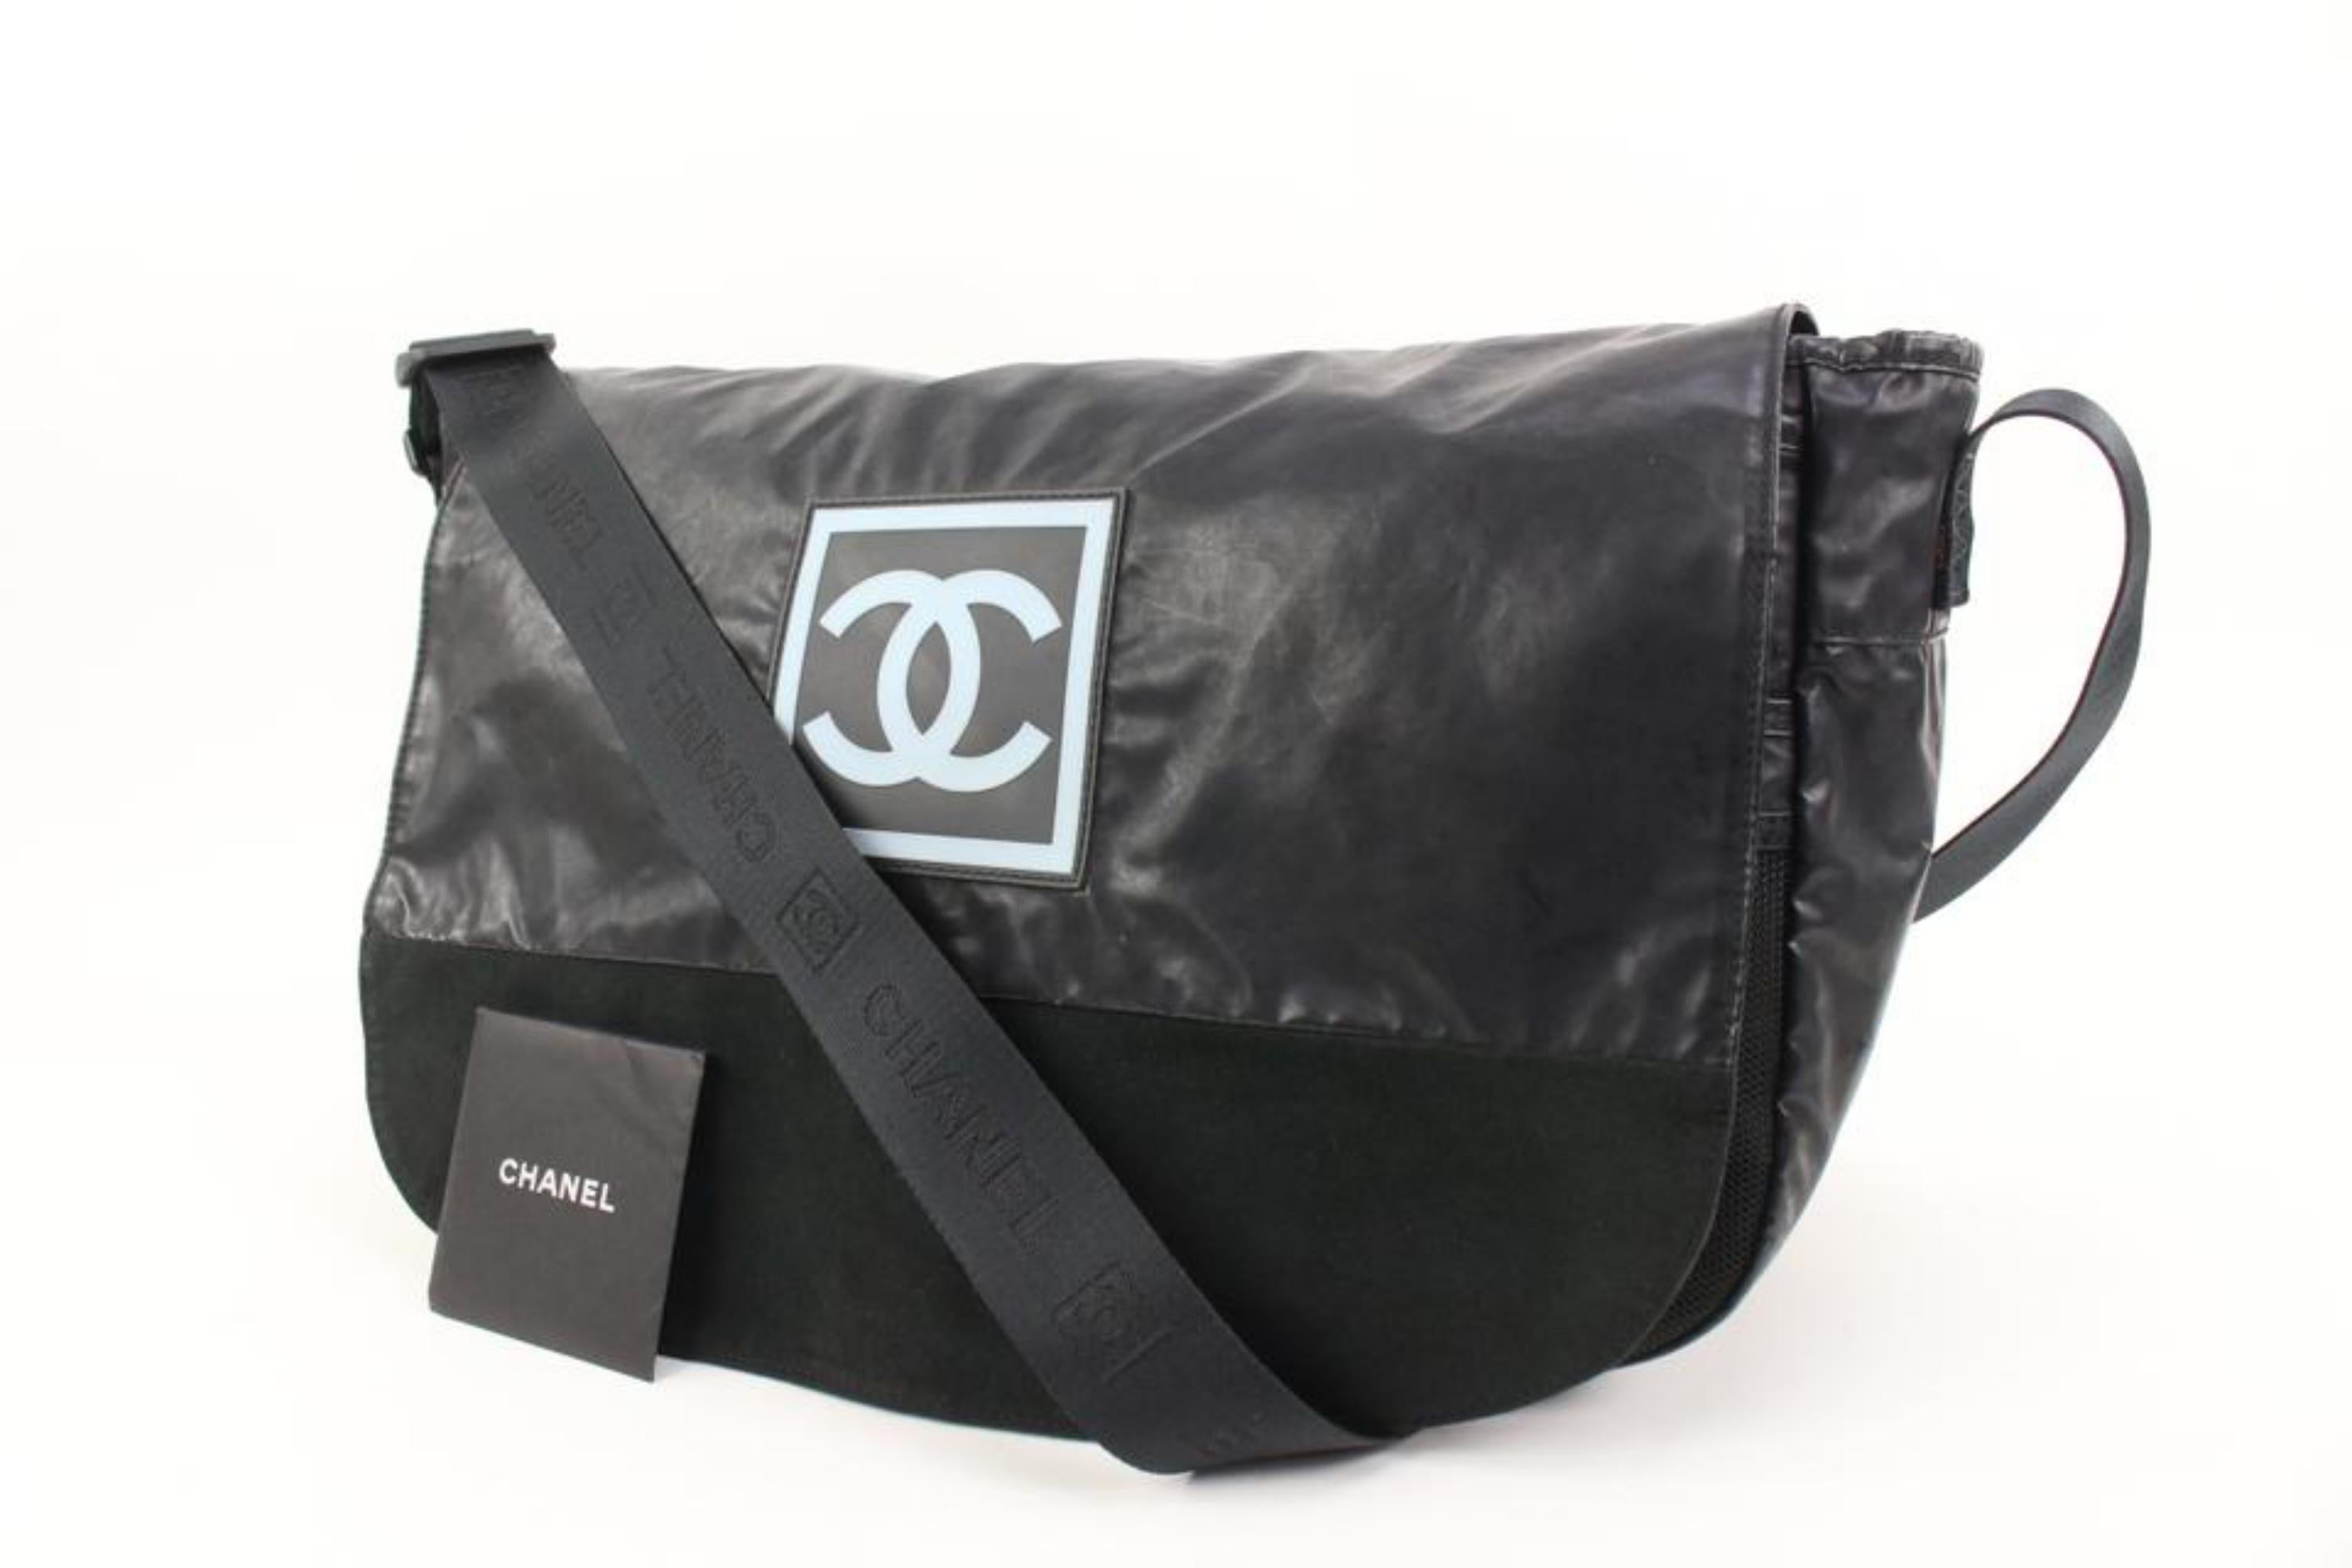 Chanel XL Black Sports Logo CC Messenger Crossbody Bag 71ck315s
Date Code/Serial Number: 8620138
Made In: Italy
Measurements: Length:  19